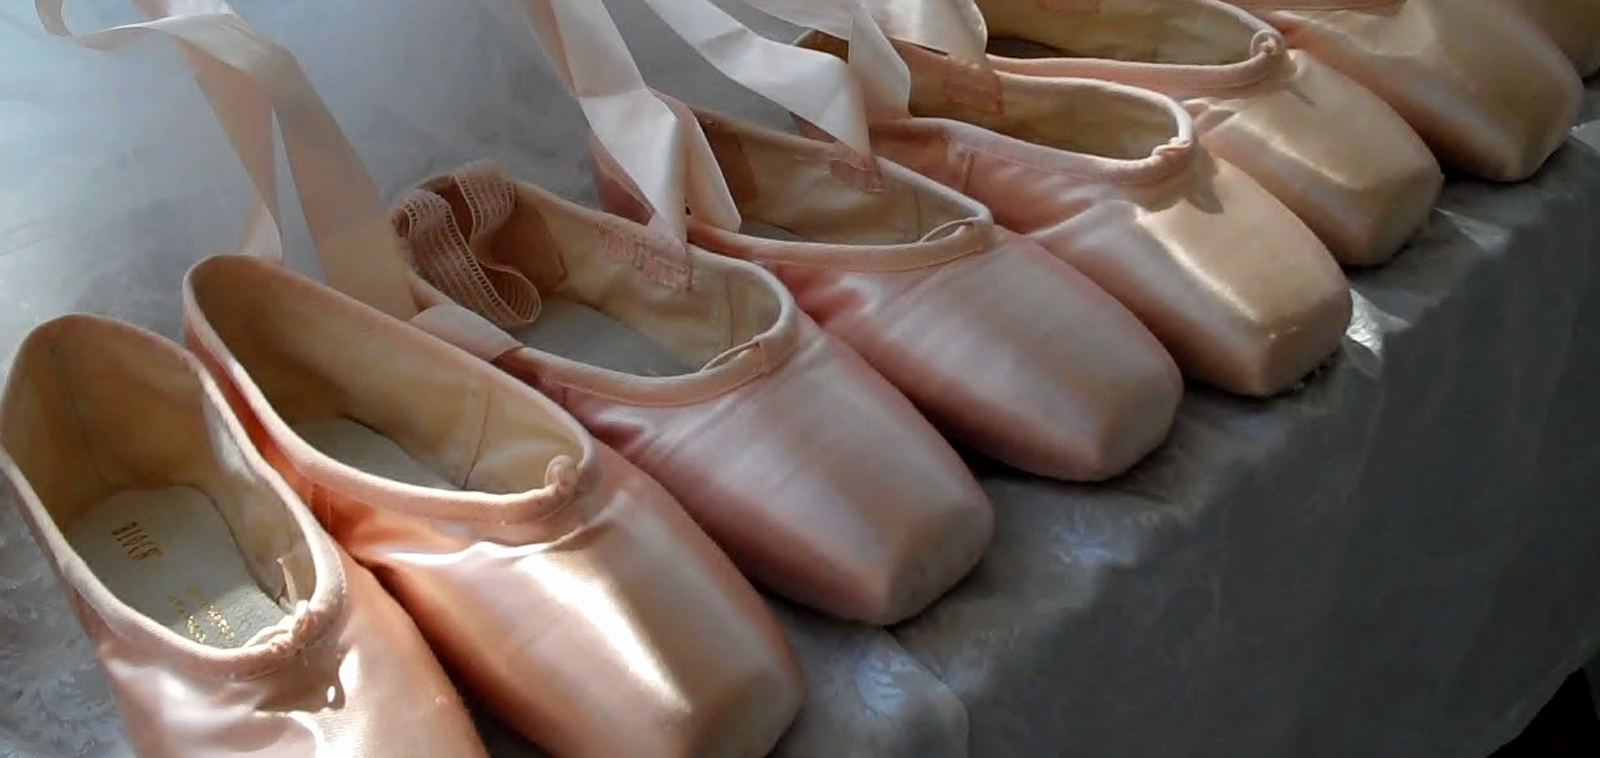 A-One Gloves Supply Company | Gloves, Gymnastic & Ballet Shoes.